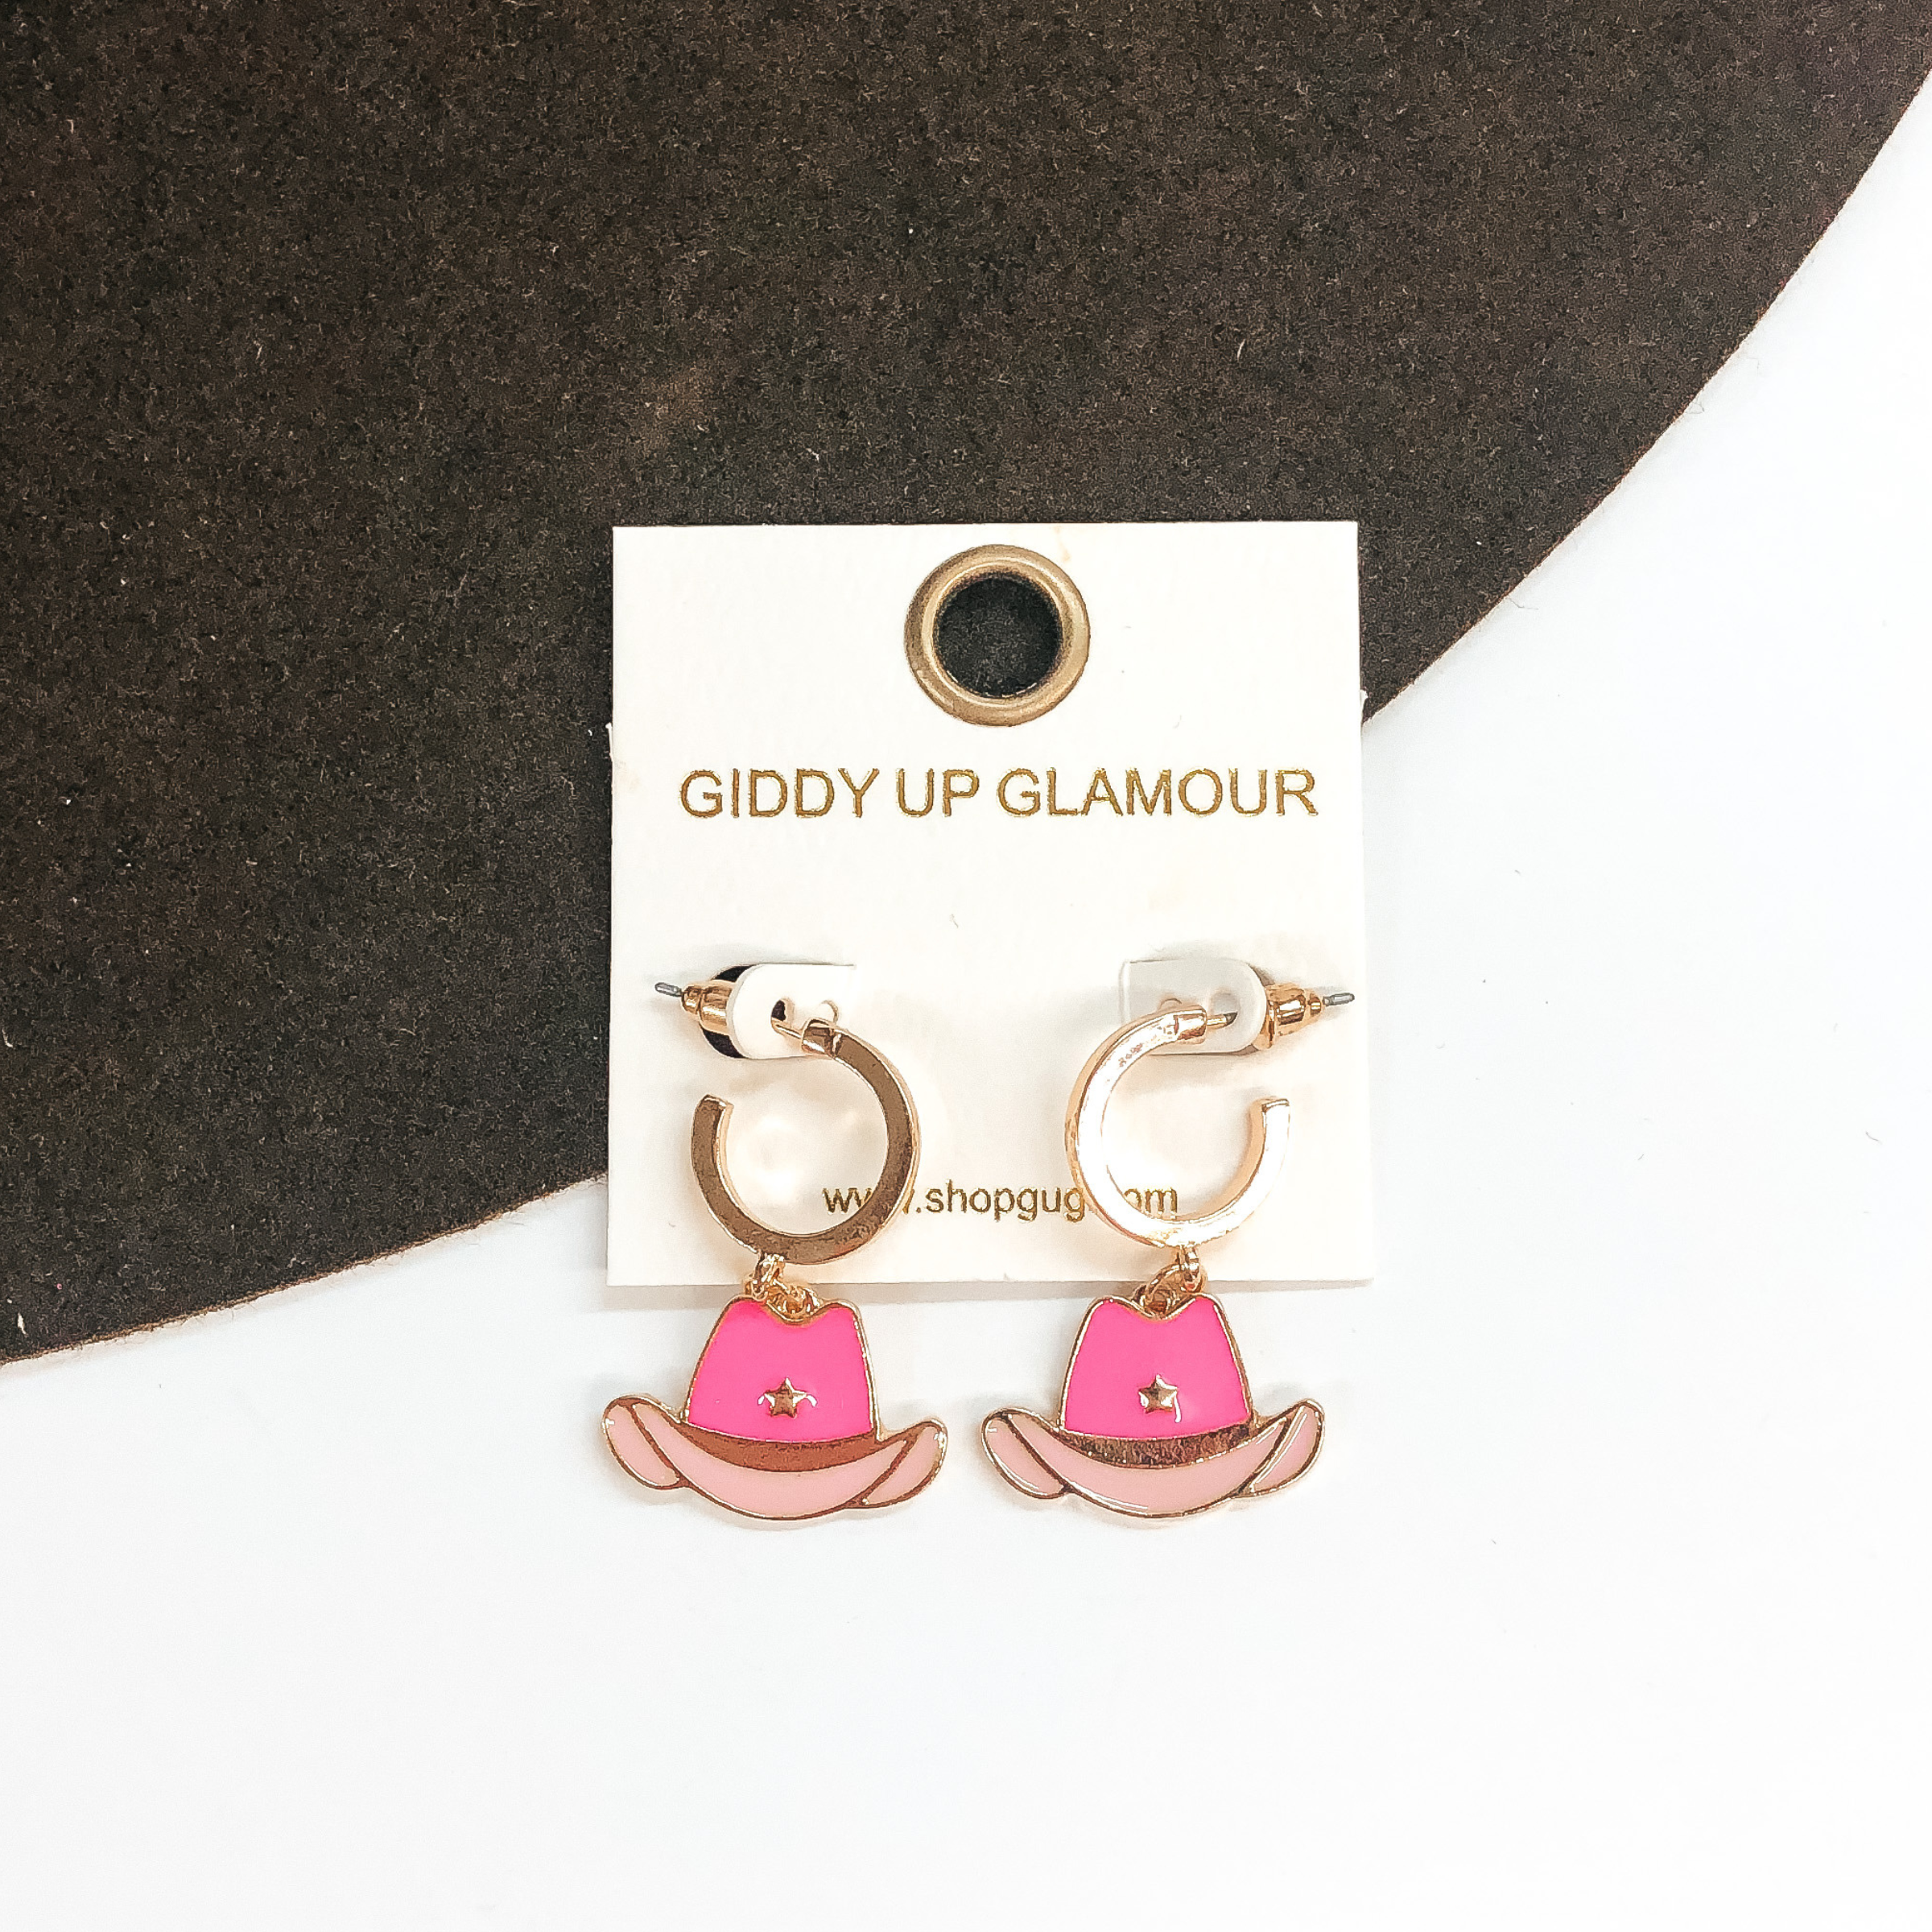 Small gold hoop earrings with a dark pink and light pink hat pendant hanging from the bottom. These earrings are pictured on a white and brown background. 